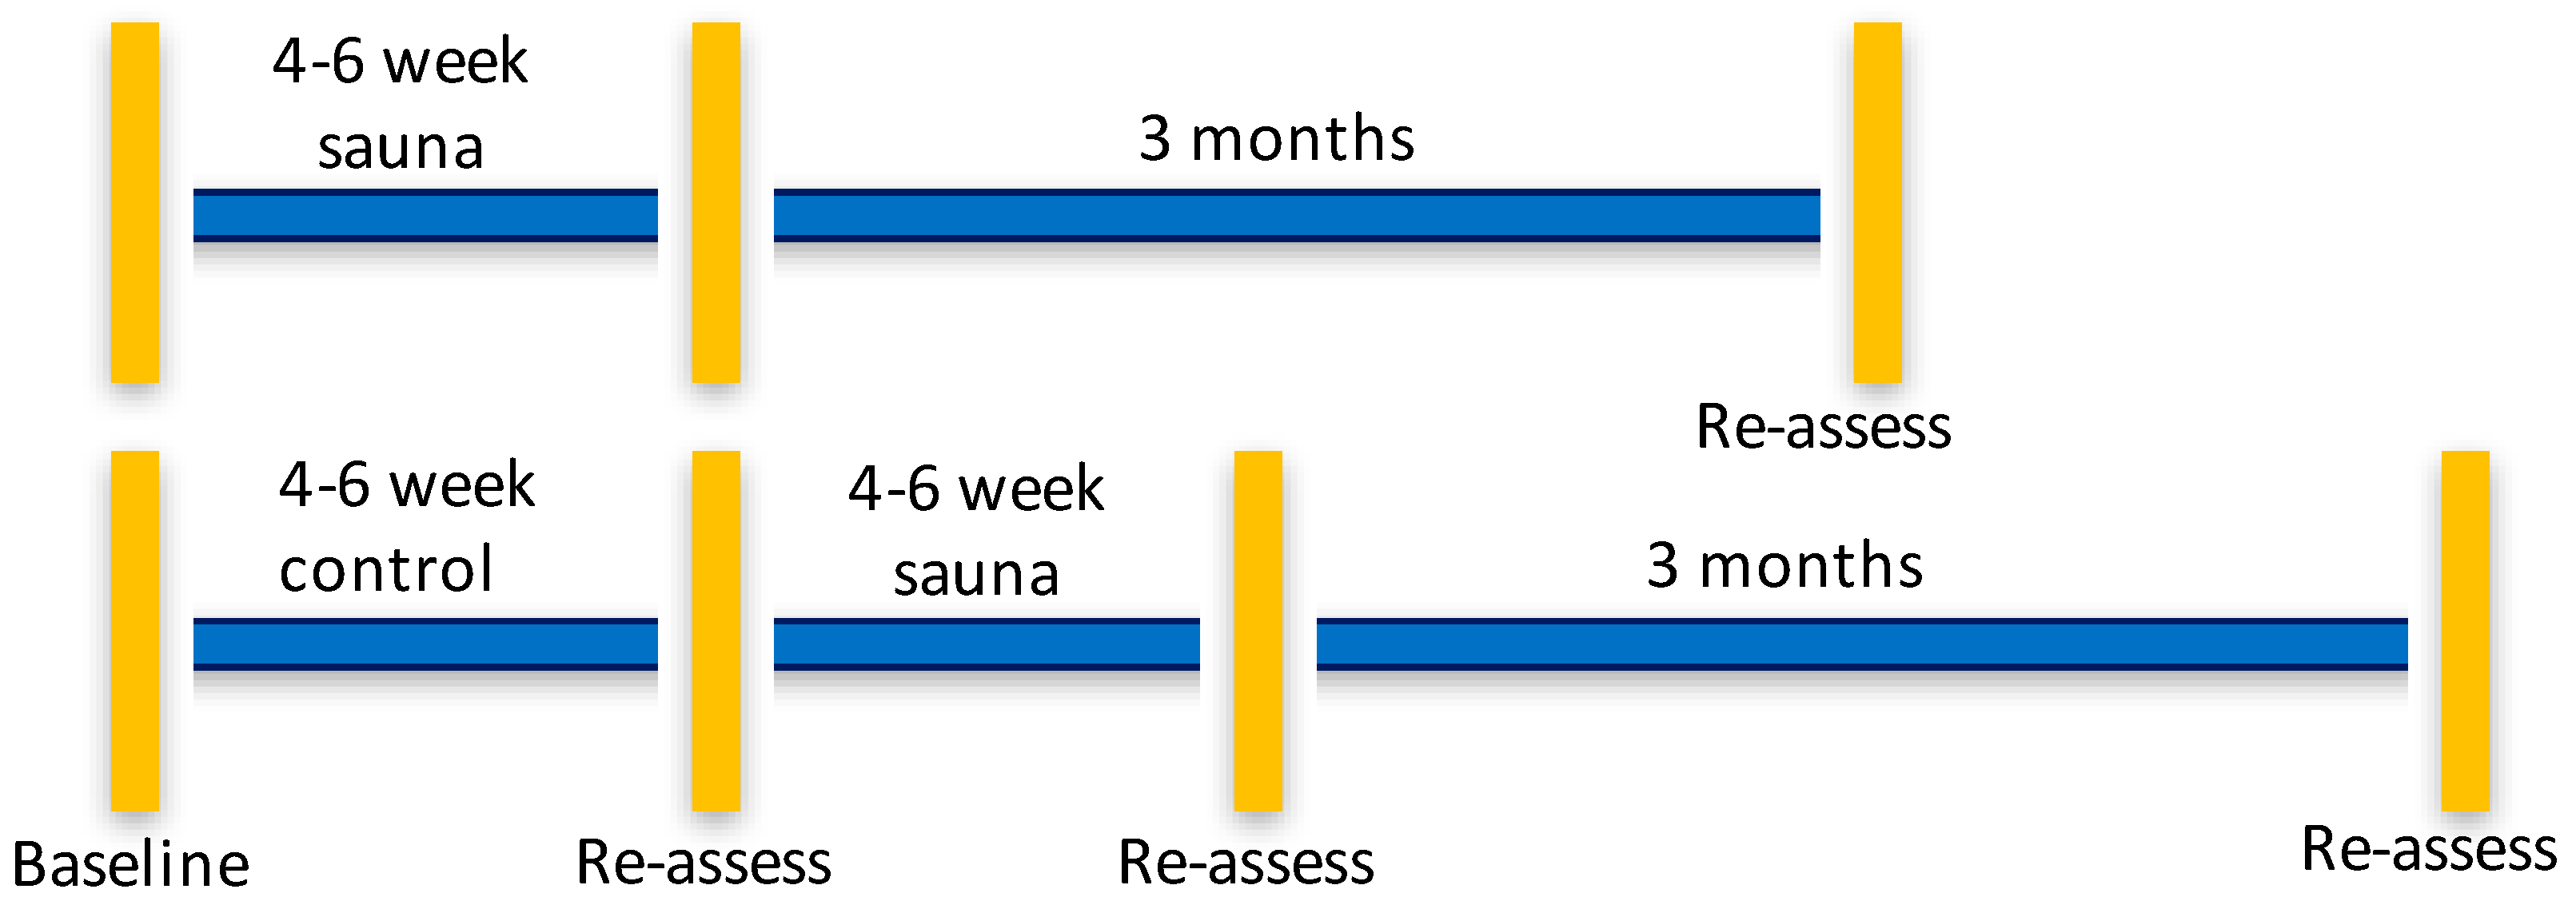 Siim Land - Here's a timeline of the effects of fasting: 4-6 hours